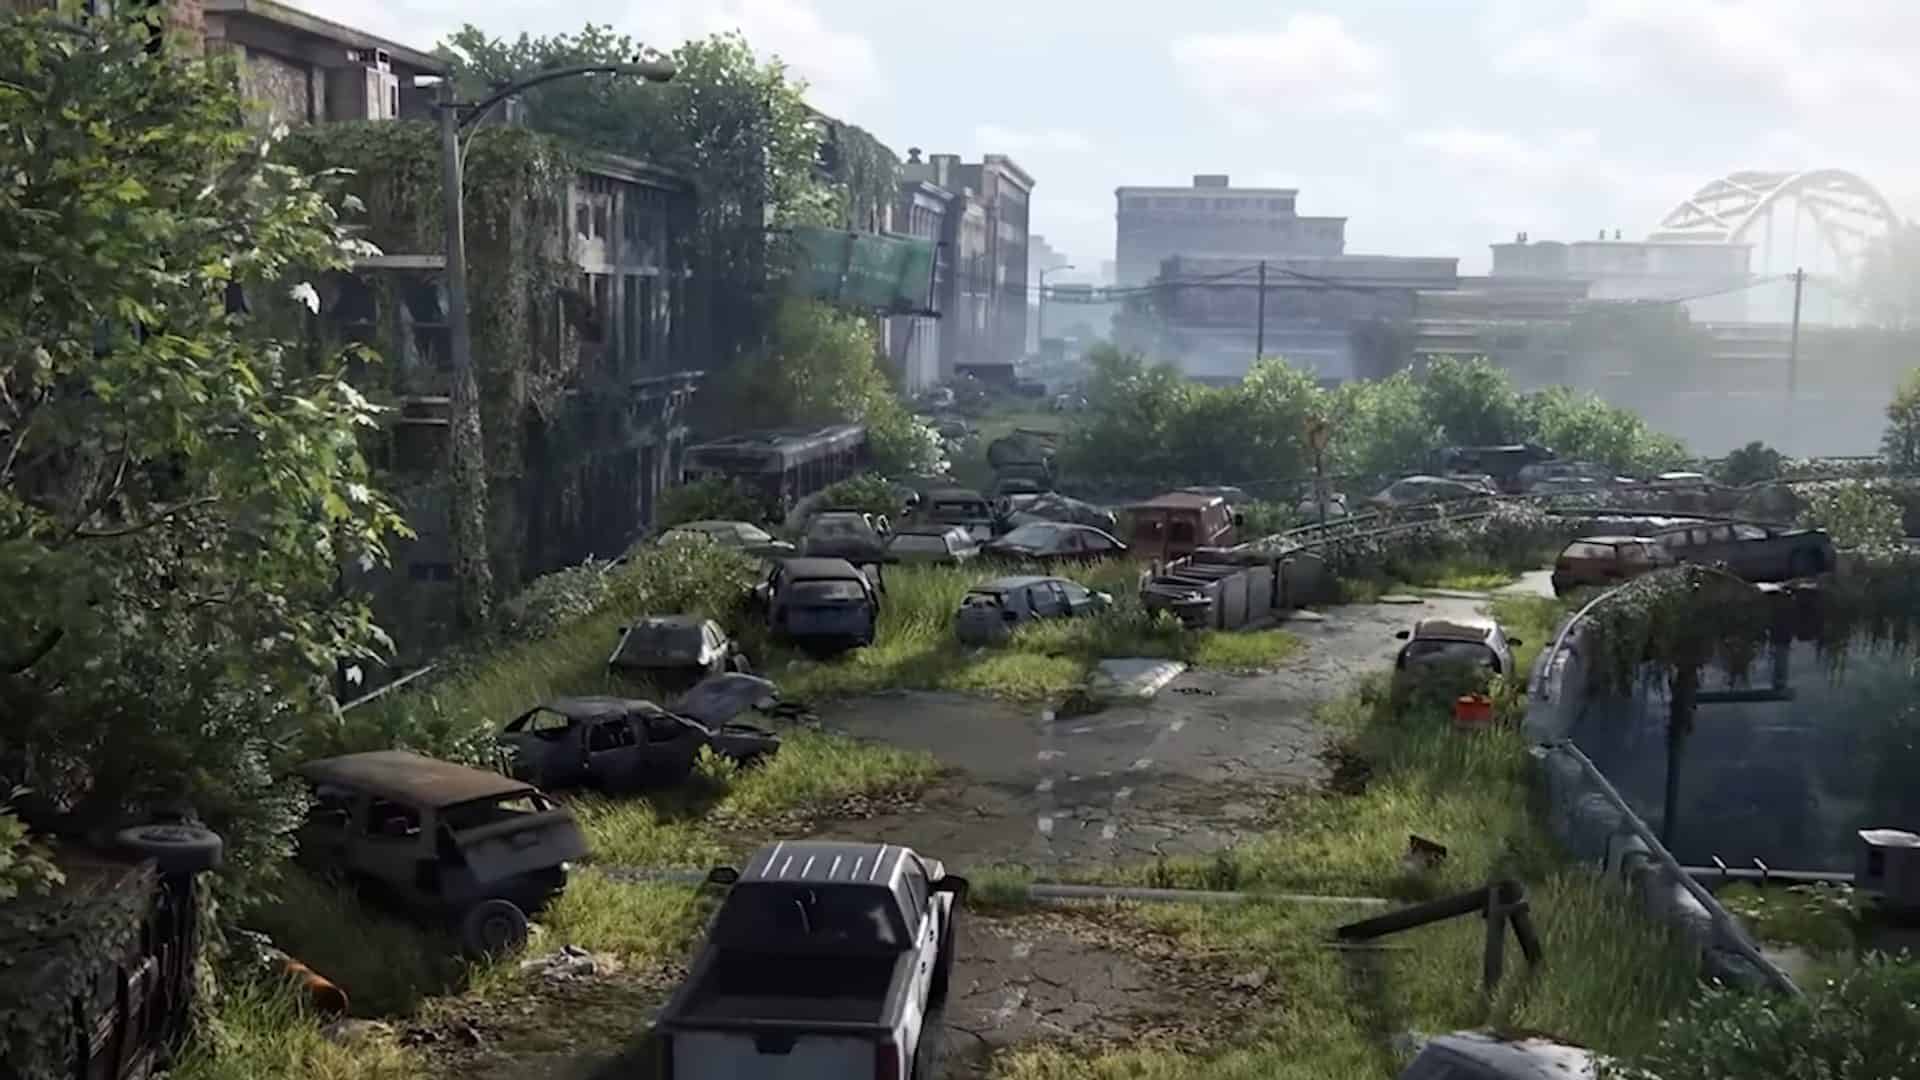 Nature taking over abandoned cities in Last of Us